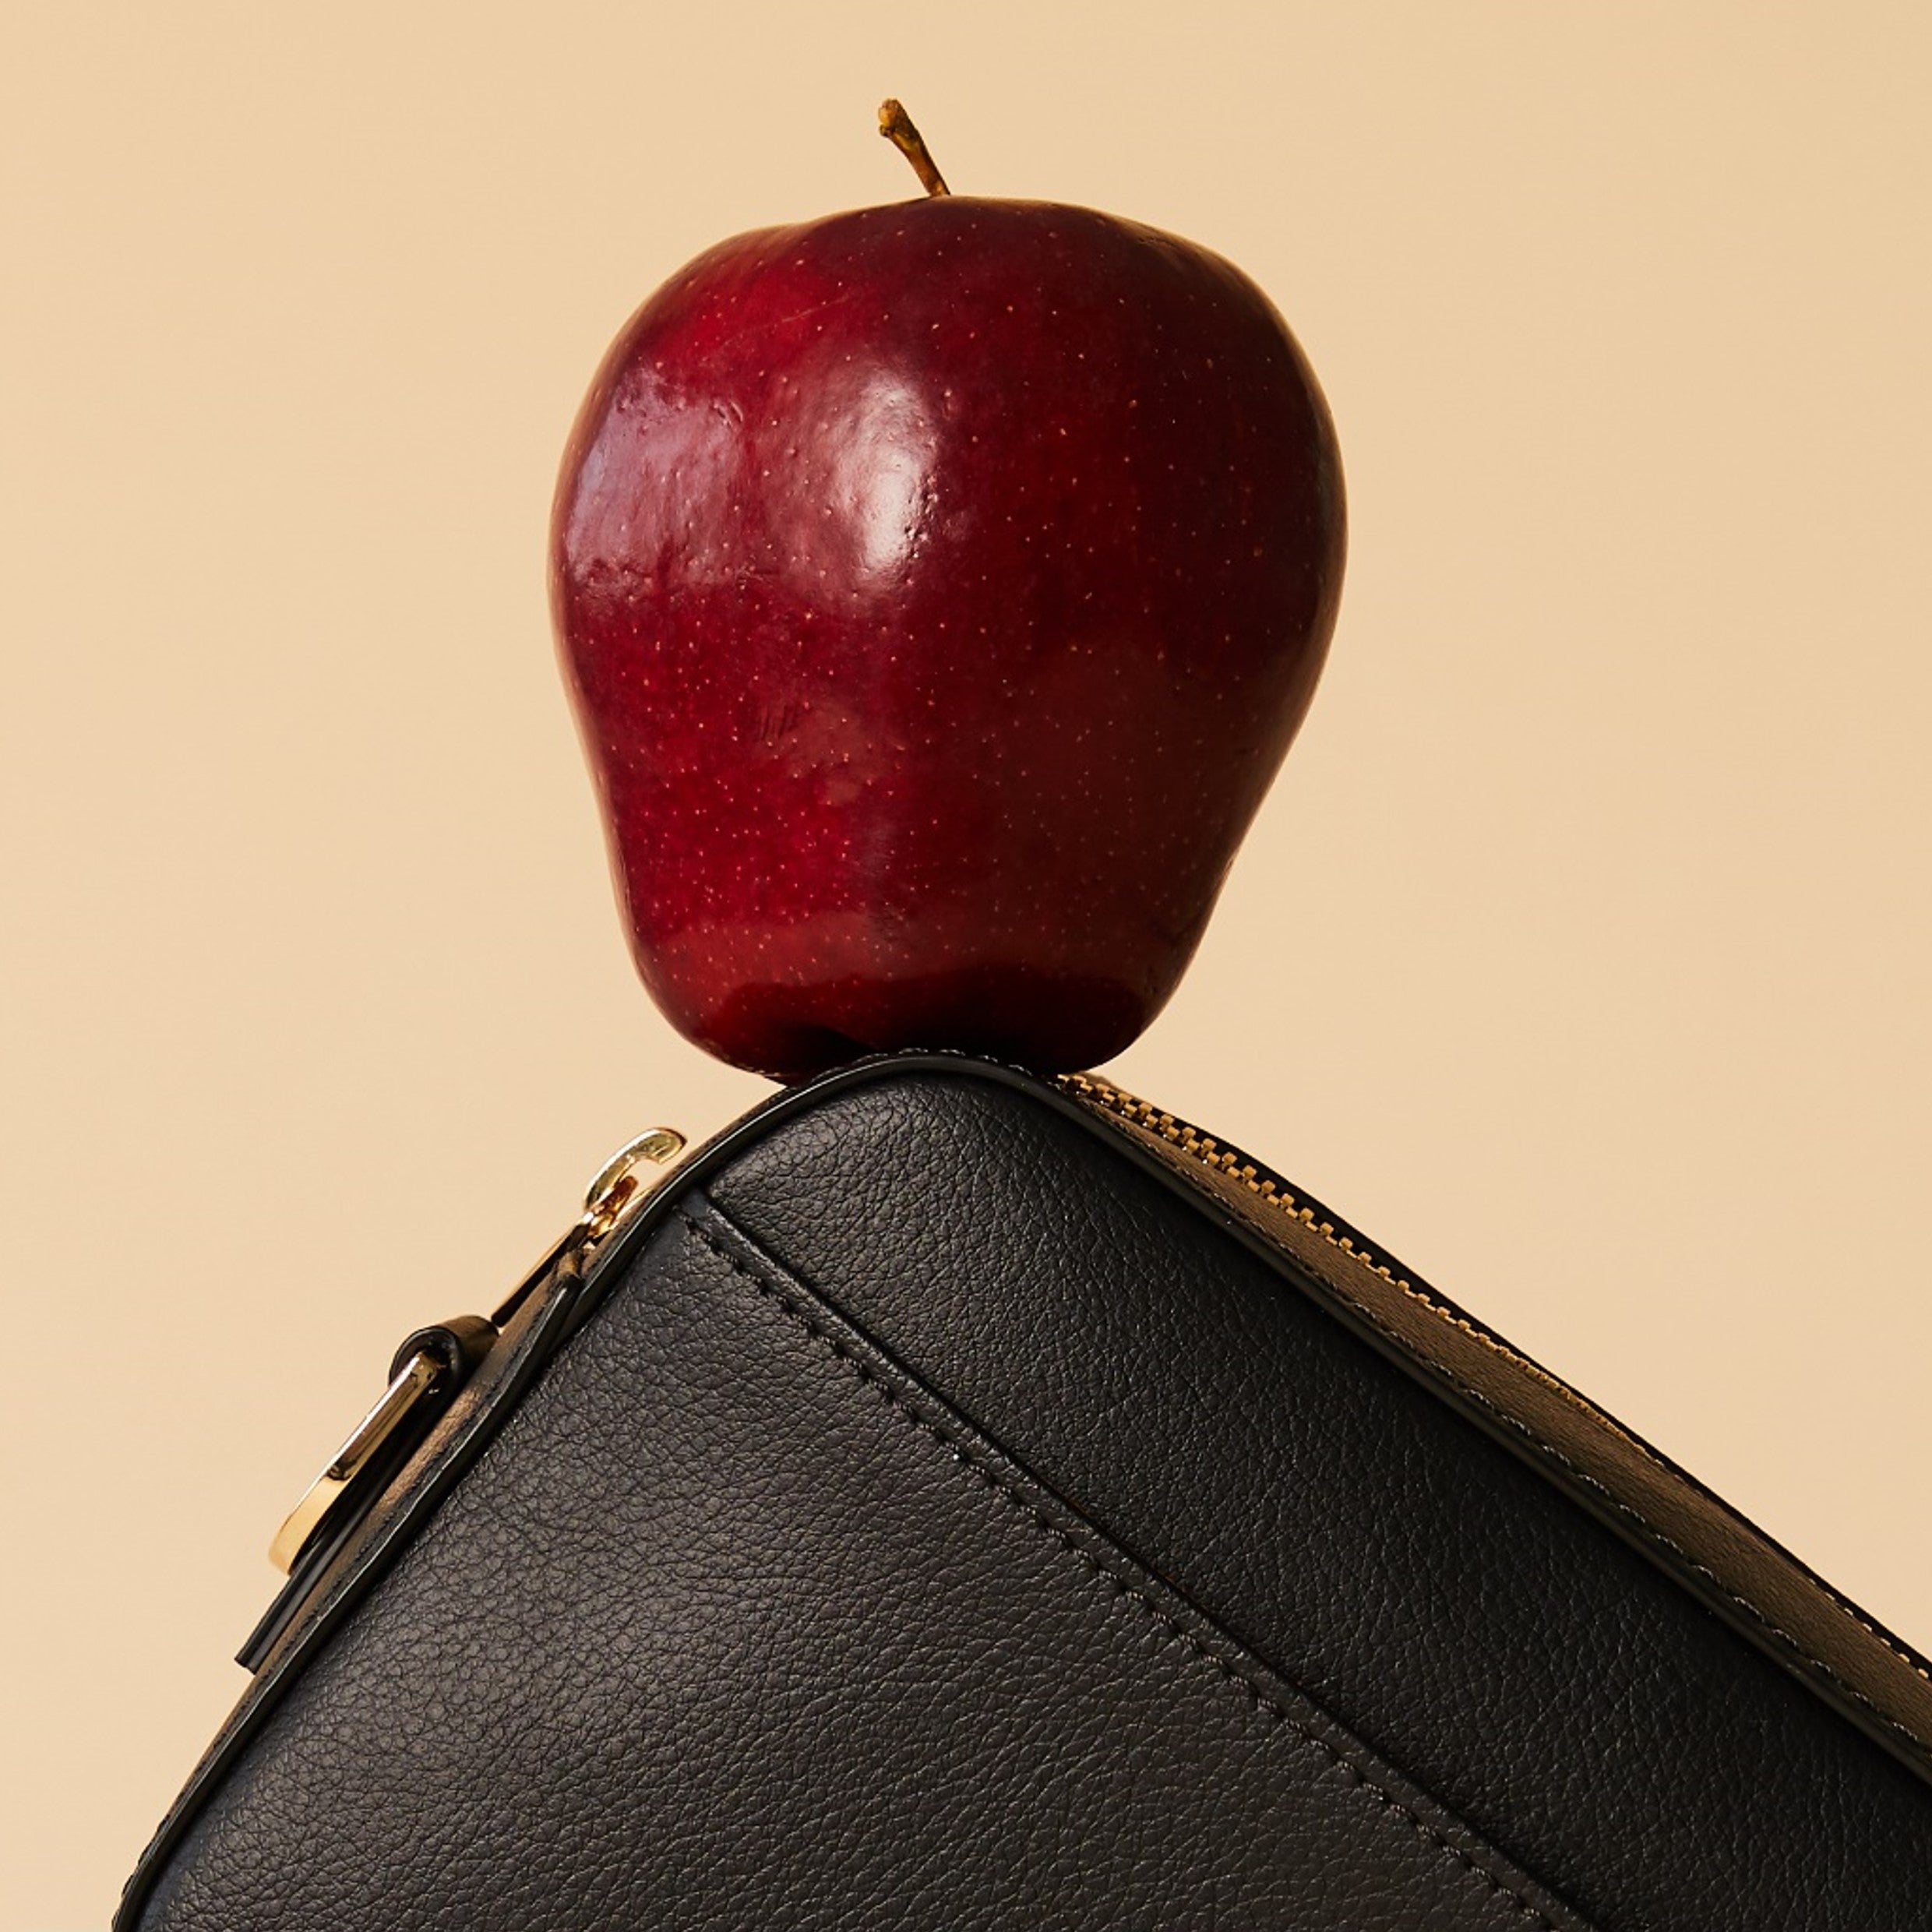 vegan bags made from apples